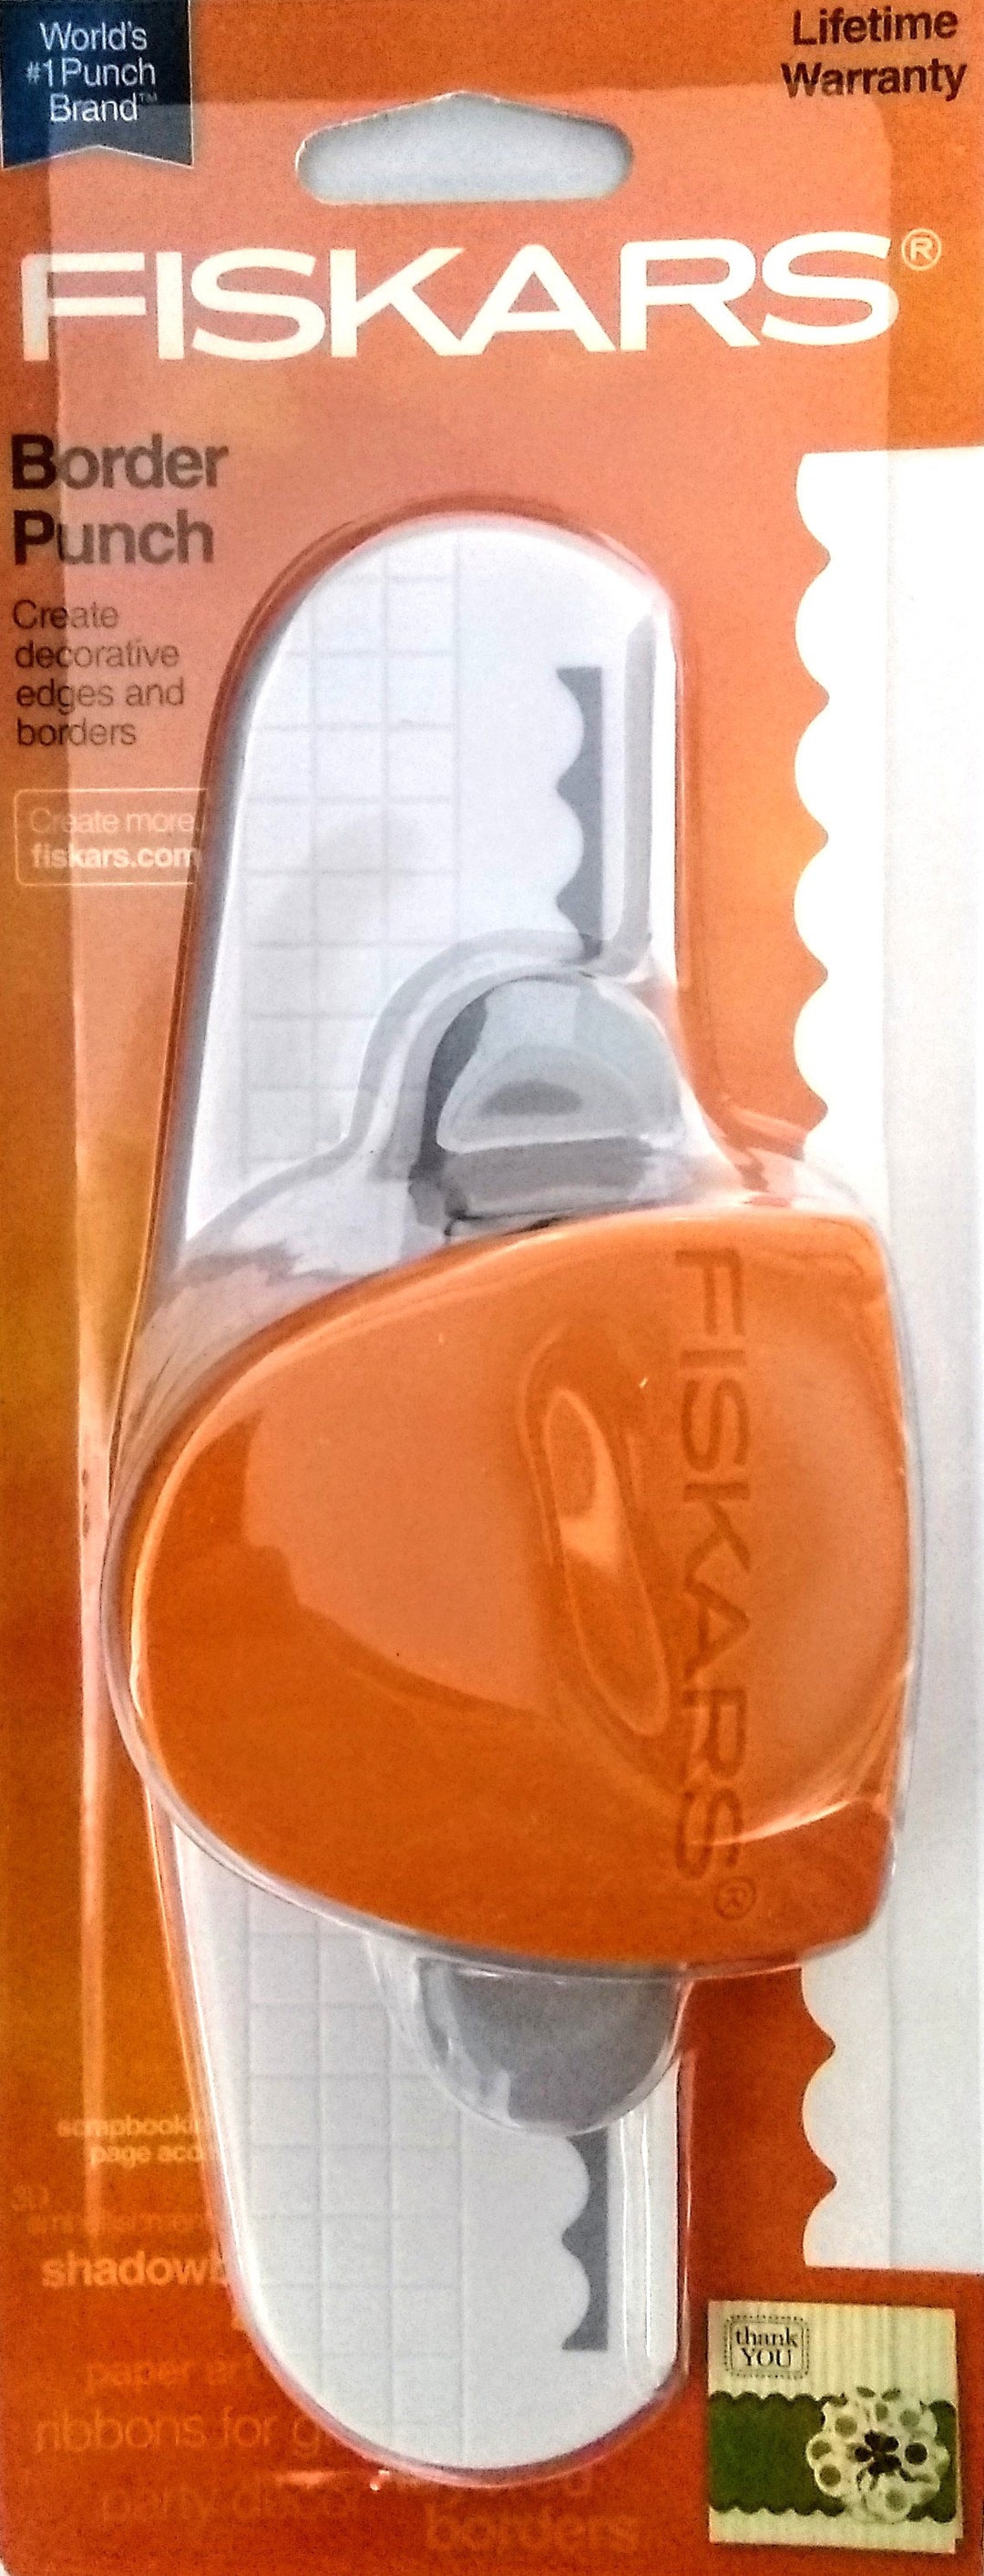 Fiskars Tag Maker Punch-Simple -TMP-7510 - Makes 3” Tags with 20